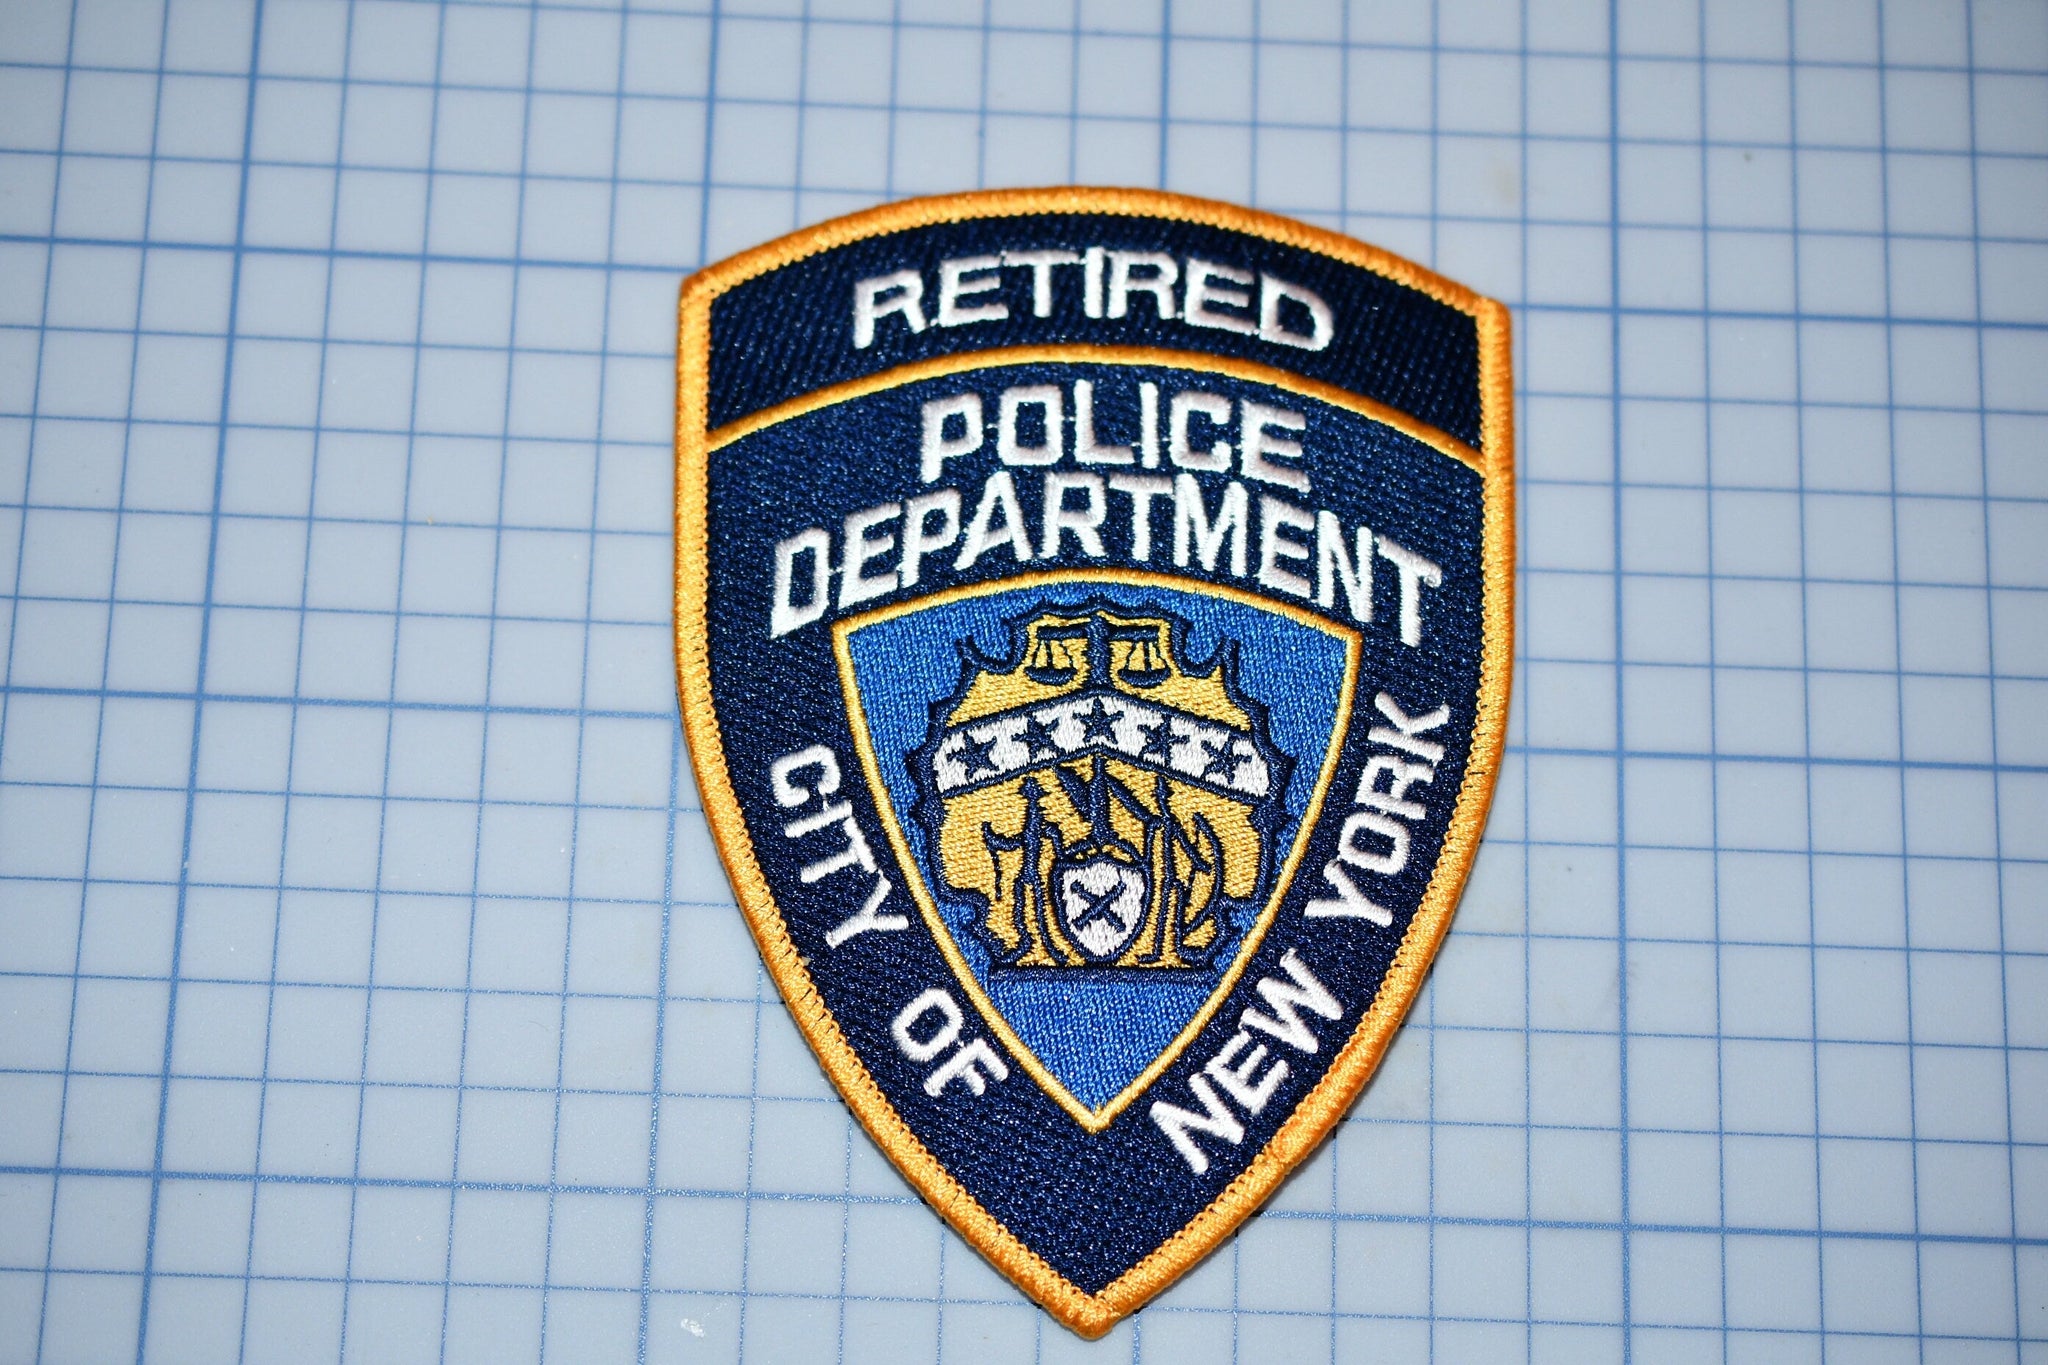 City Of New York Police "Retired" Patch (B19)